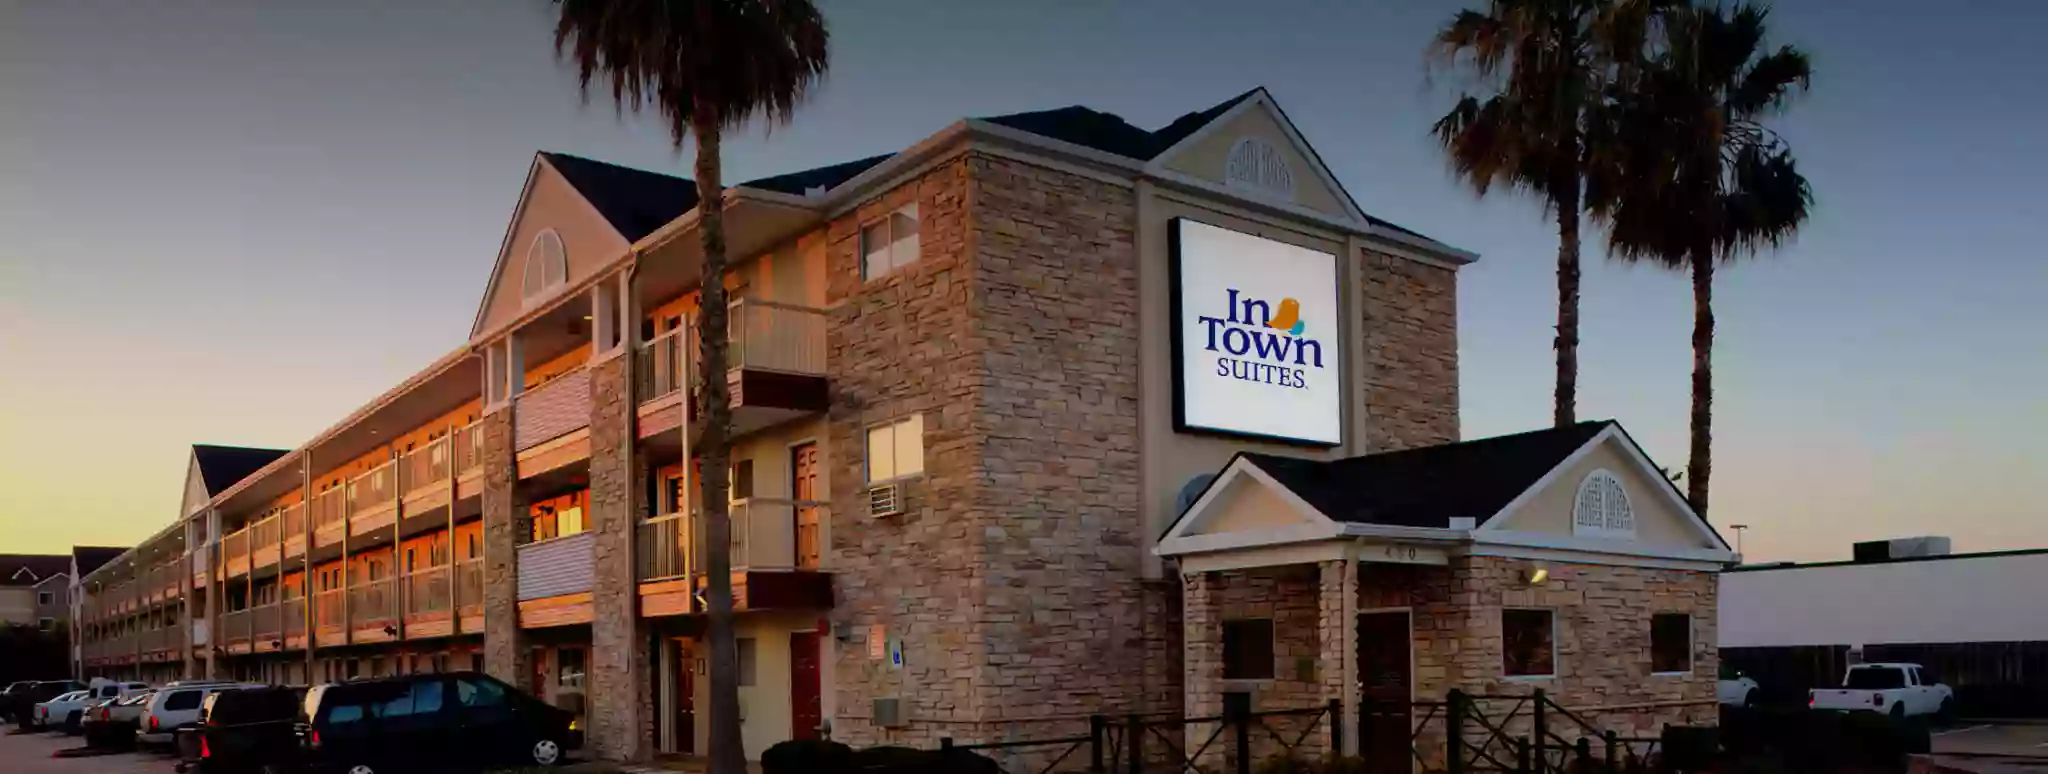 InTown Suites Extended Stay Knoxville TN